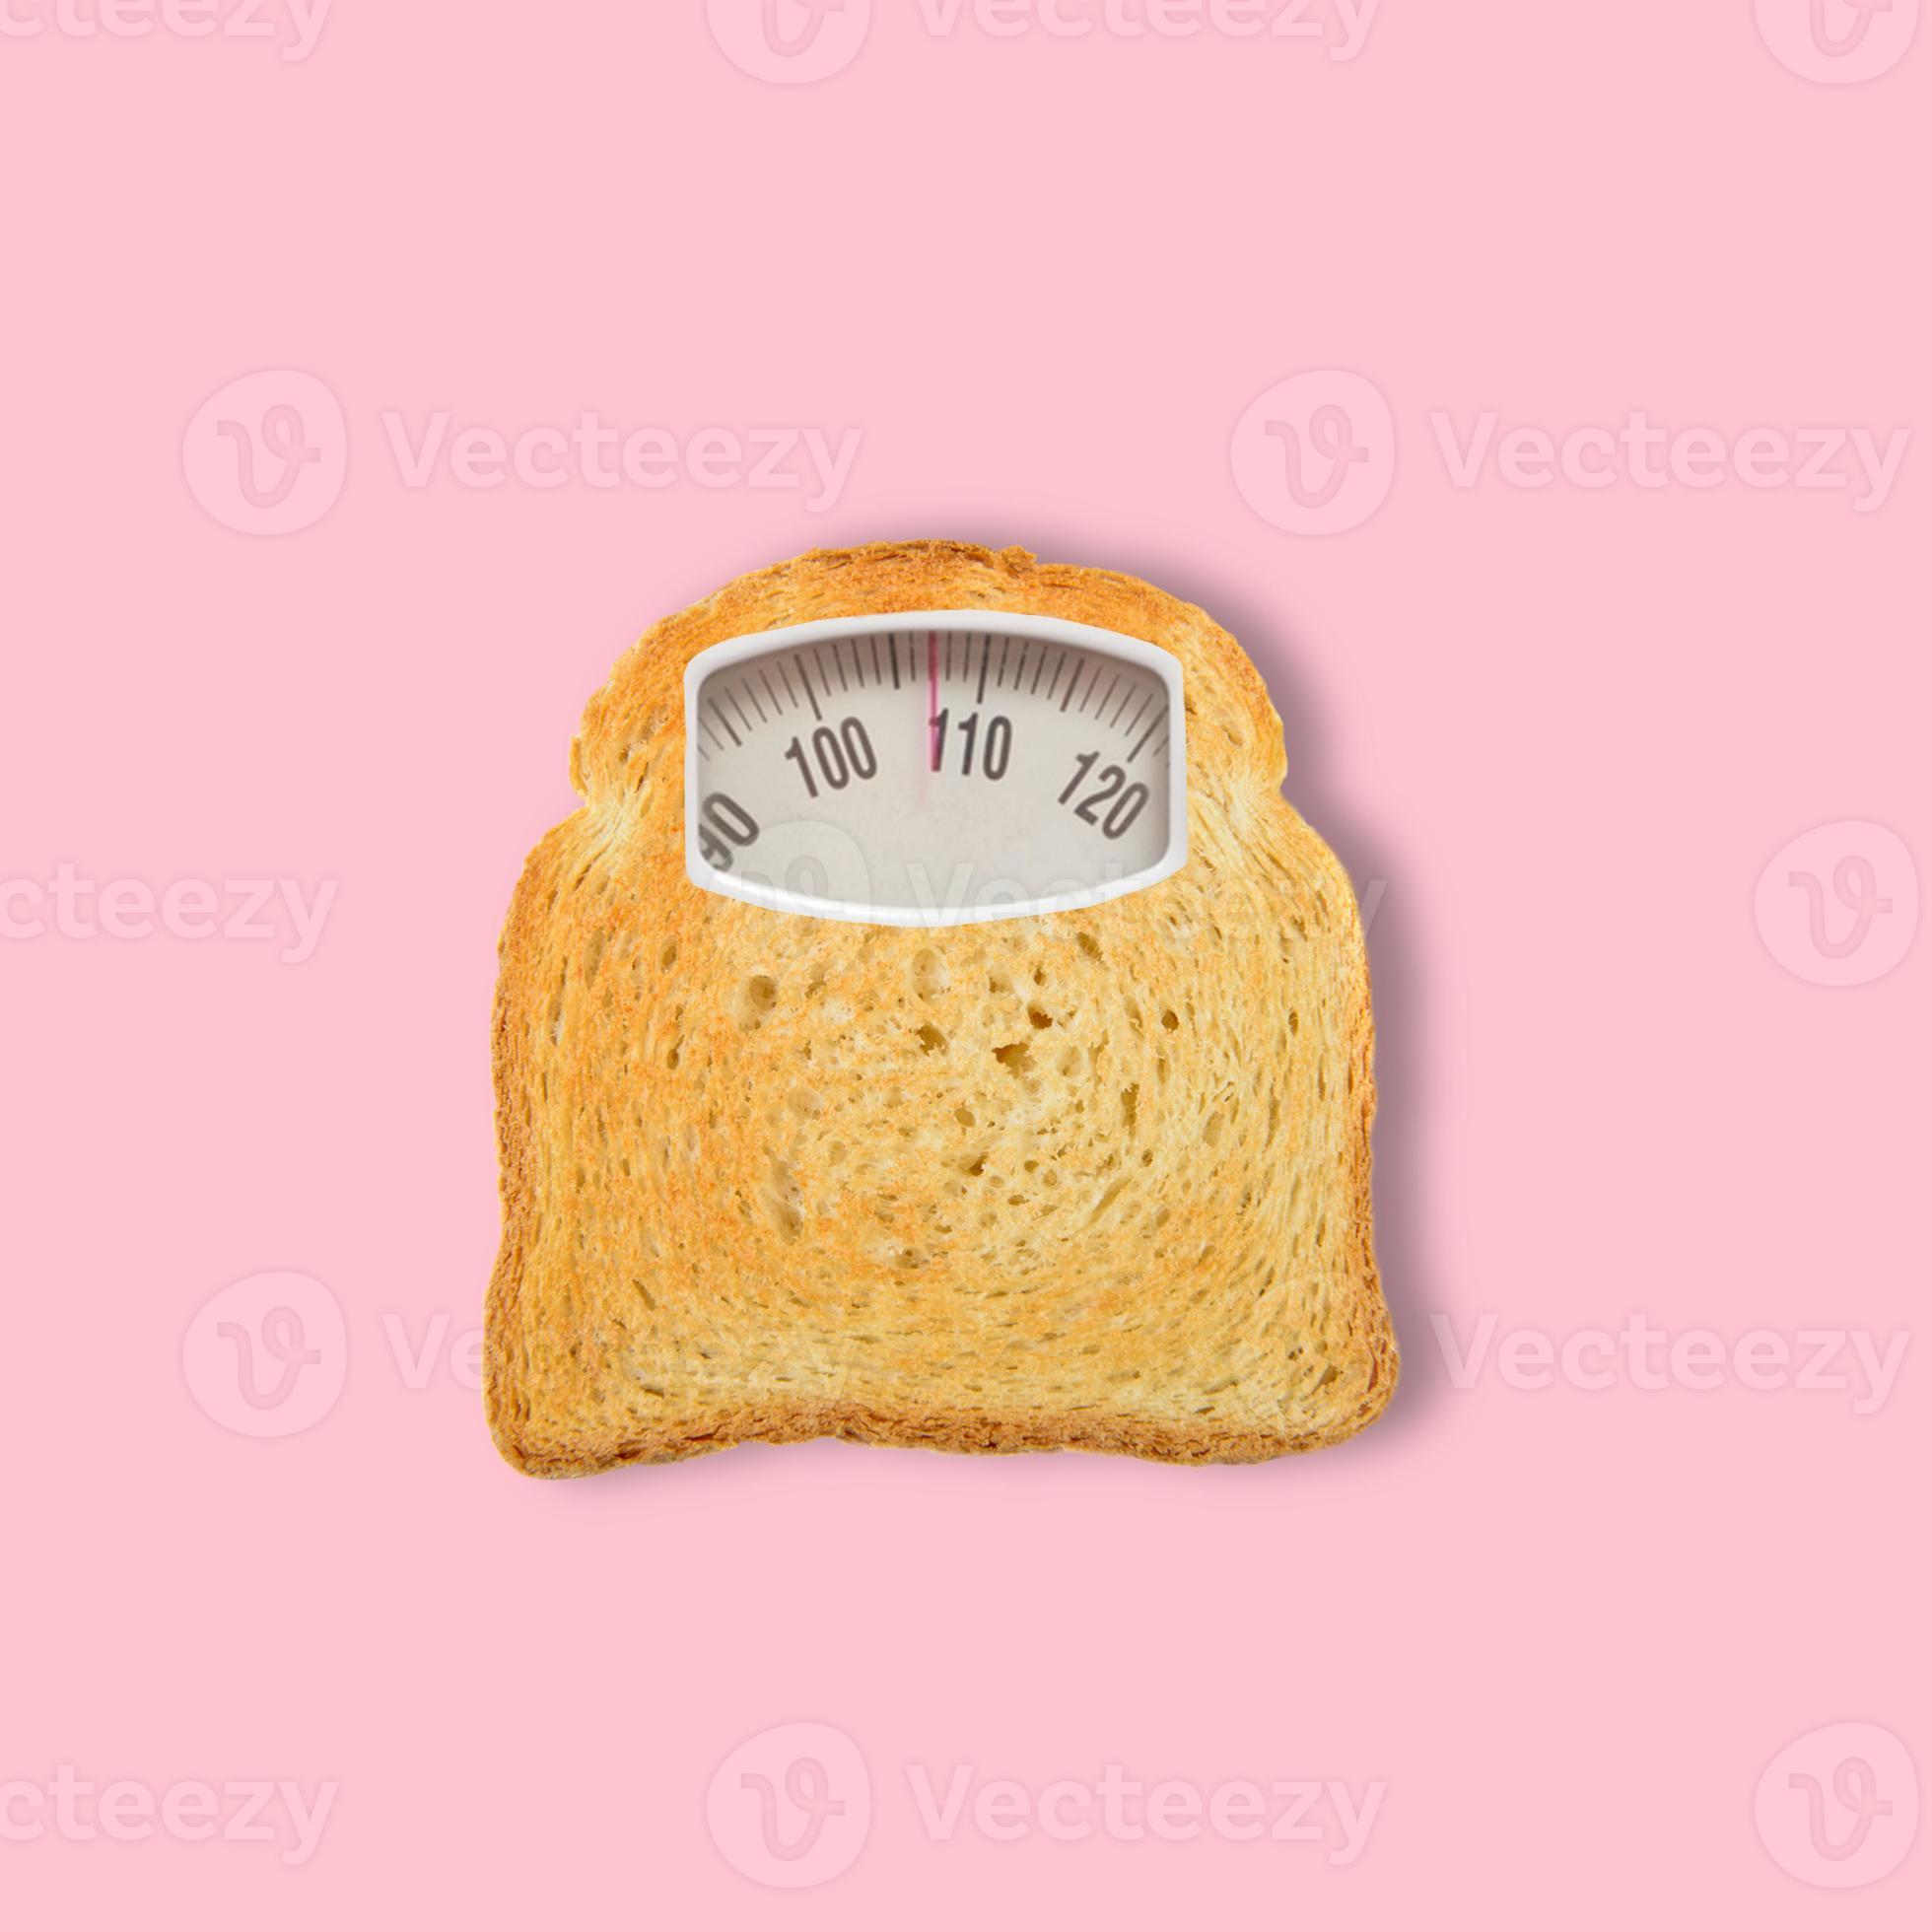 https://static.vecteezy.com/system/resources/previews/009/772/086/large_2x/sliced-toast-bread-as-an-weight-scale-on-pink-background-diet-concept-top-view-minimal-food-concept-collage-made-out-of-toast-slice-and-weight-scale-contemporary-art-collage-photo.jpg